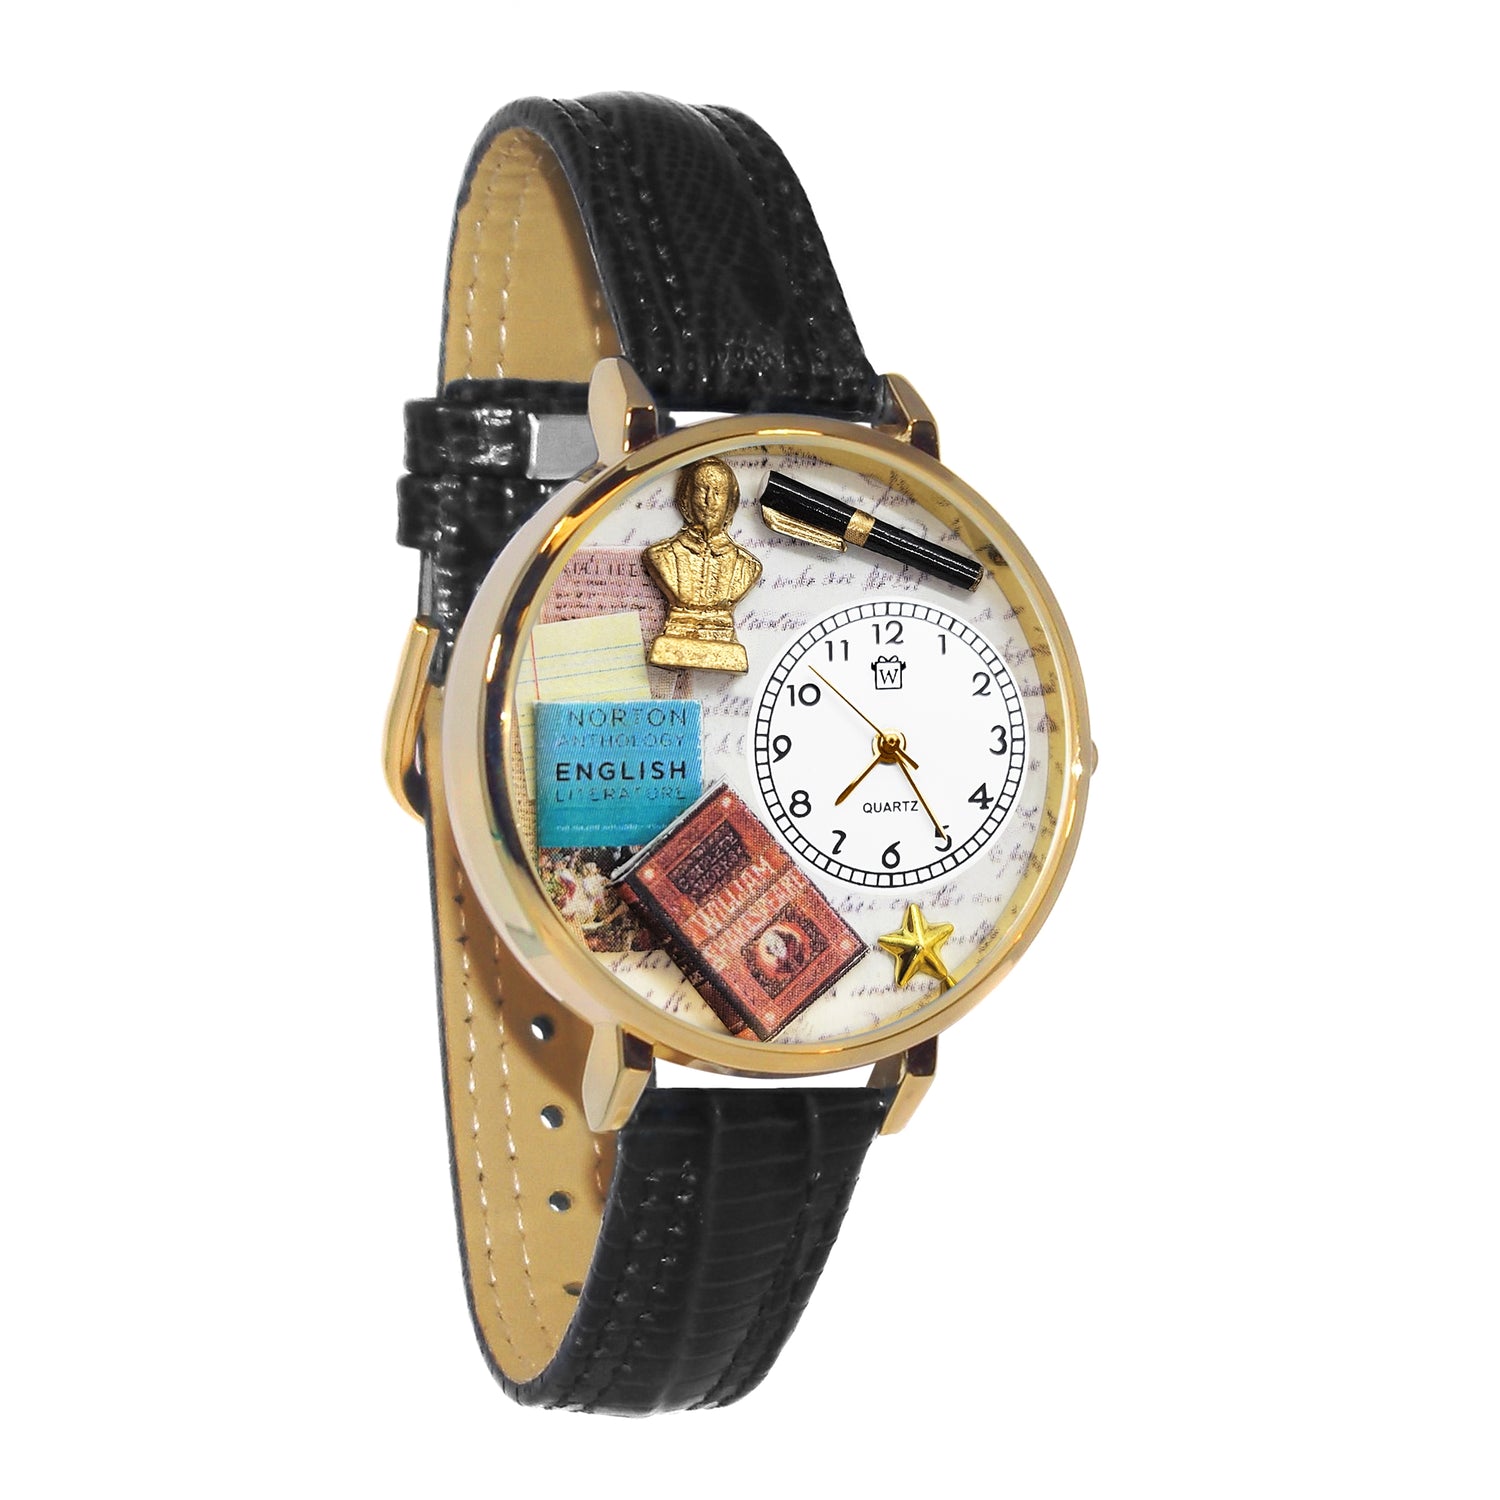 Whimsical Gifts | English Teacher 3D Watch Large Style | Handmade in USA | Professions Themed | Teacher | Novelty Unique Fun Miniatures Gift | Gold Finish Black Leather Watch Band